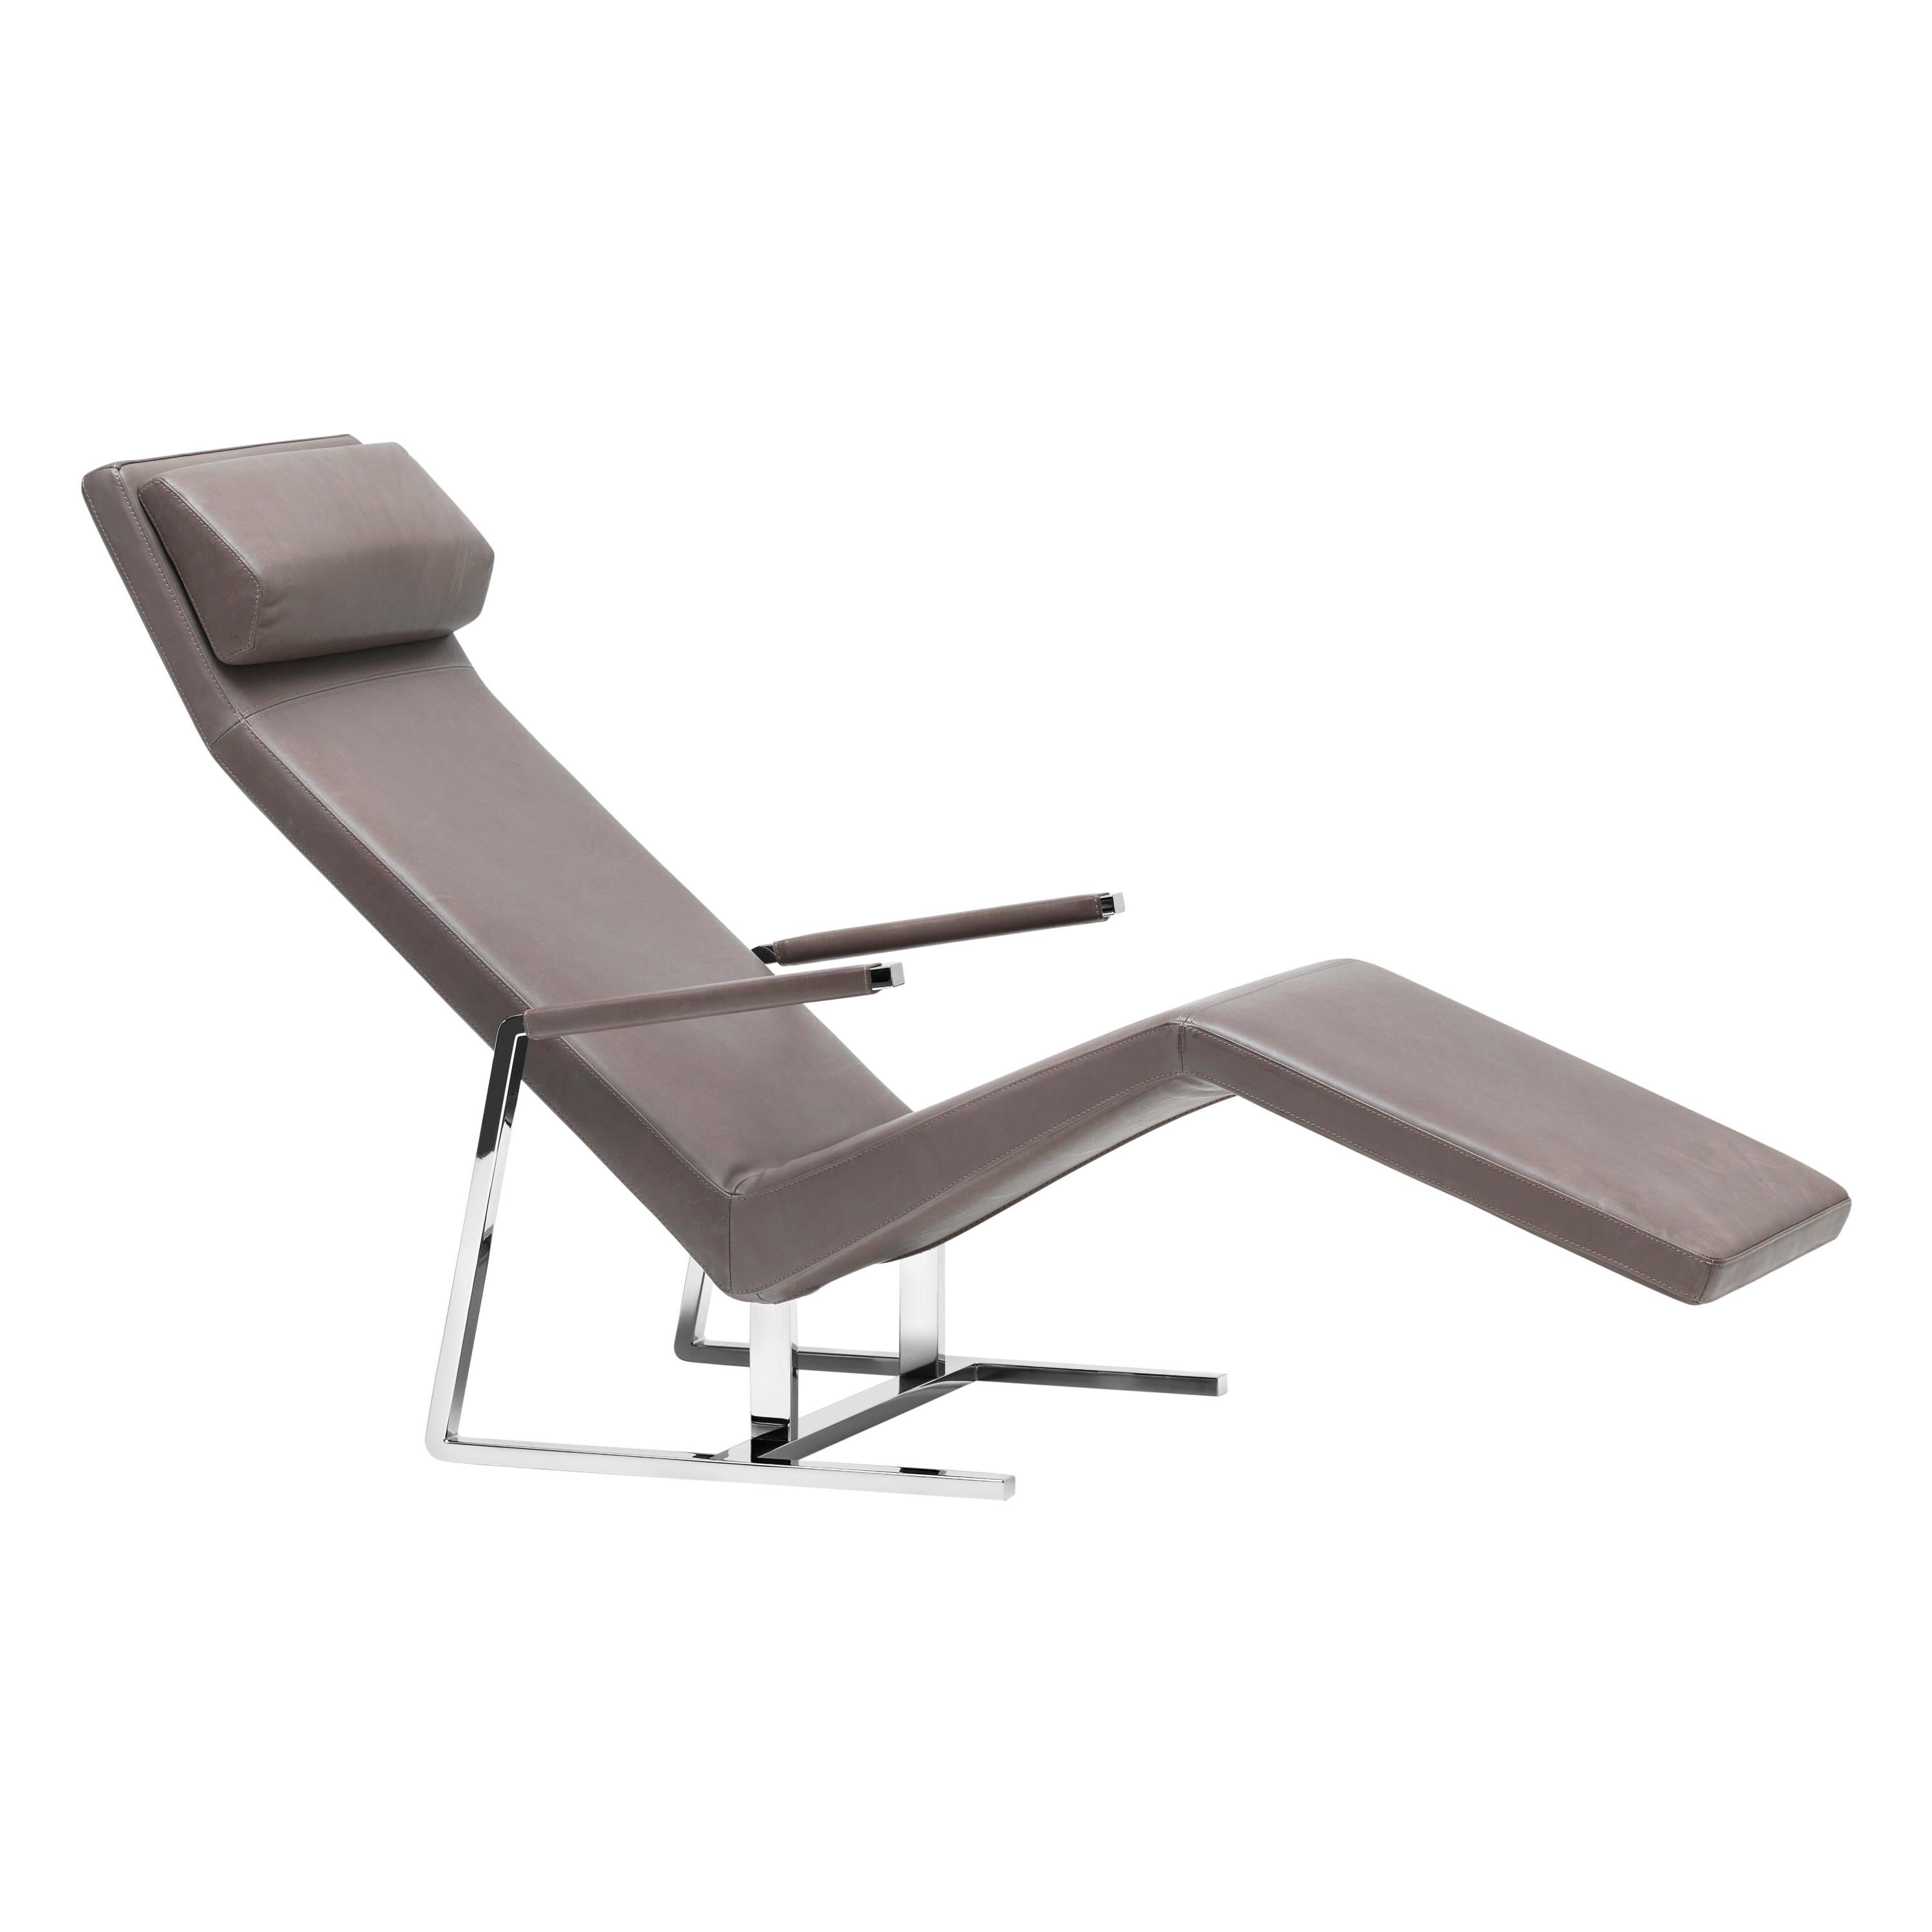 De Sede Smooth Leather Longue Chair by Christophe Marchand